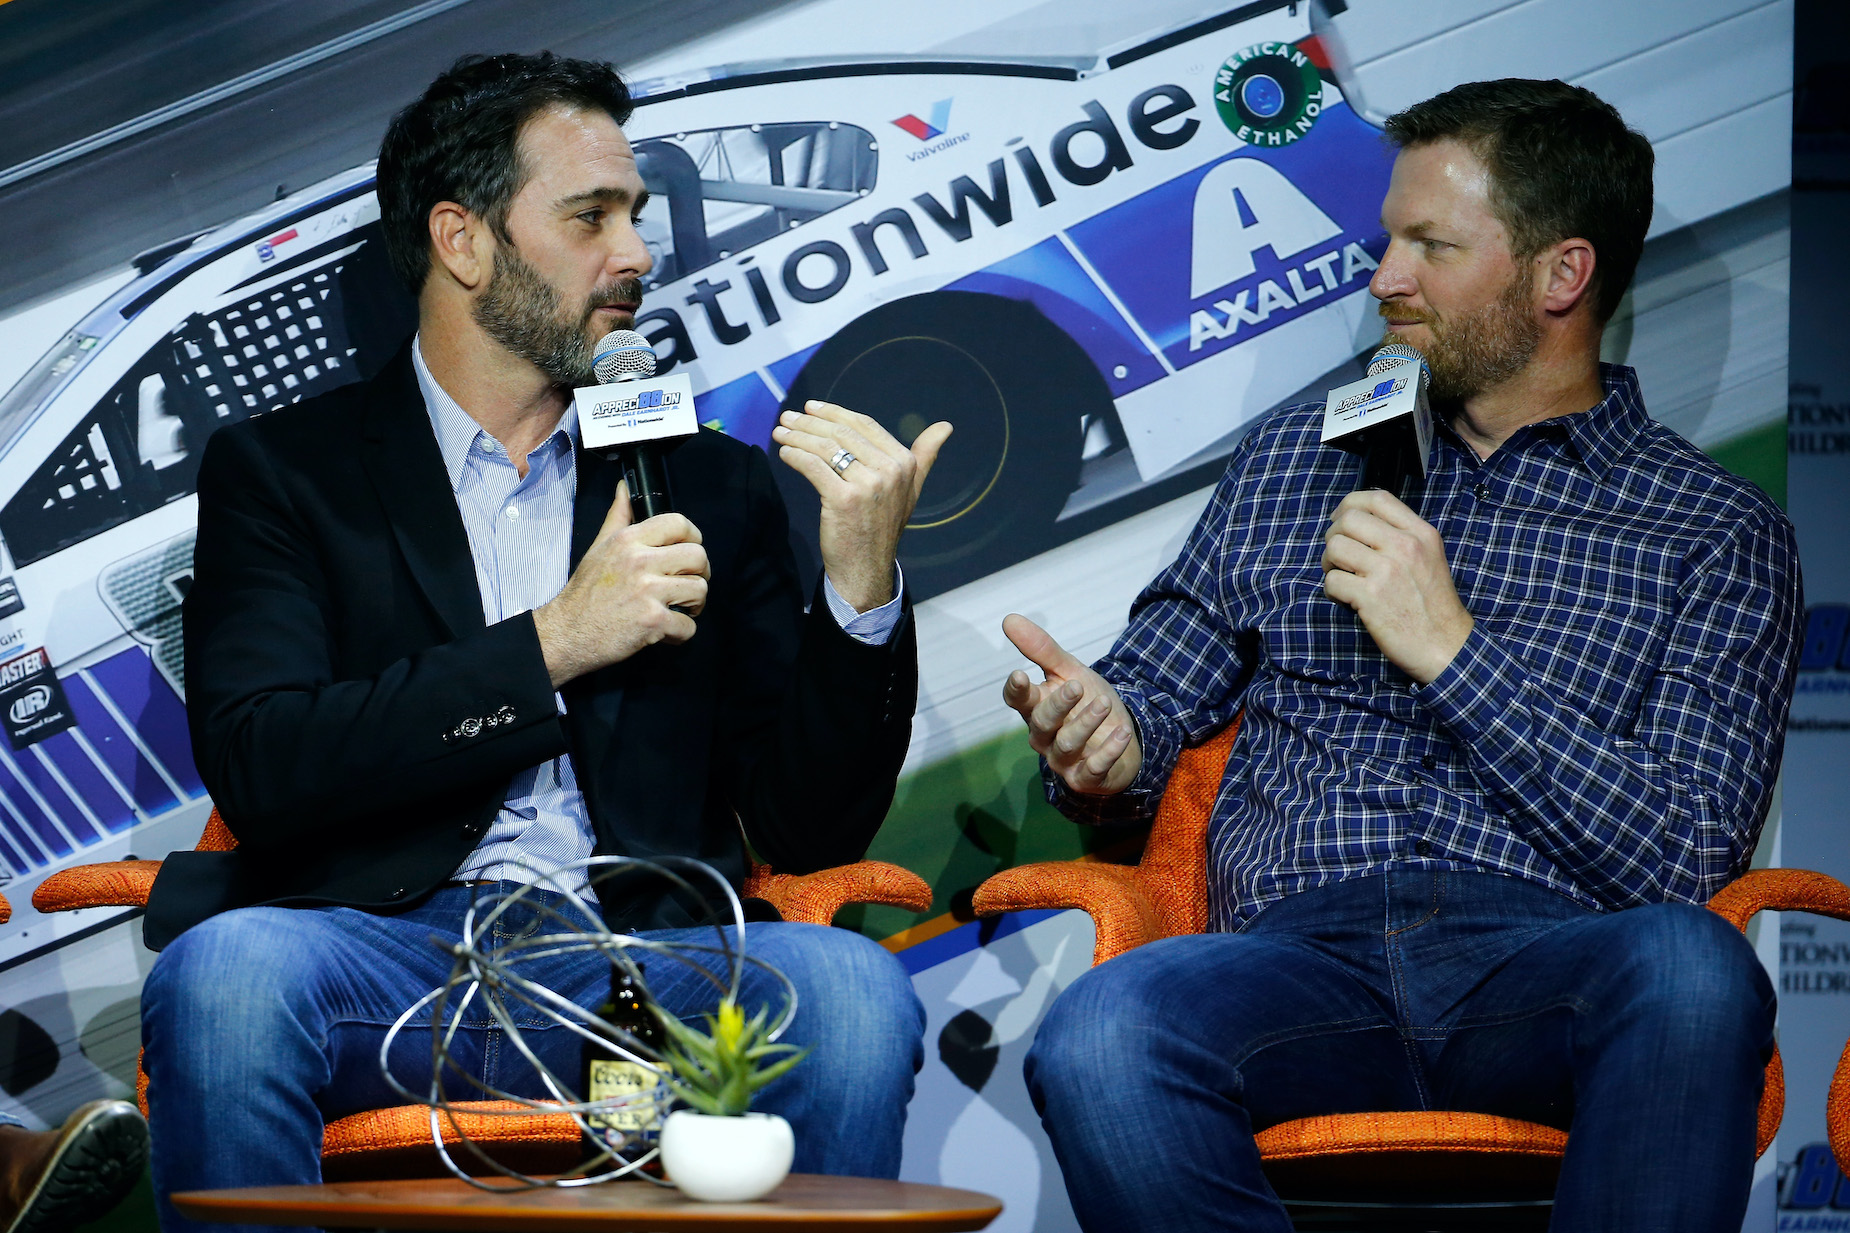 NASCAR drivers Jimmie Johnson (L) and Dale Earnhardt Jr. (R) talk at a 2017 event in Las Vegas.